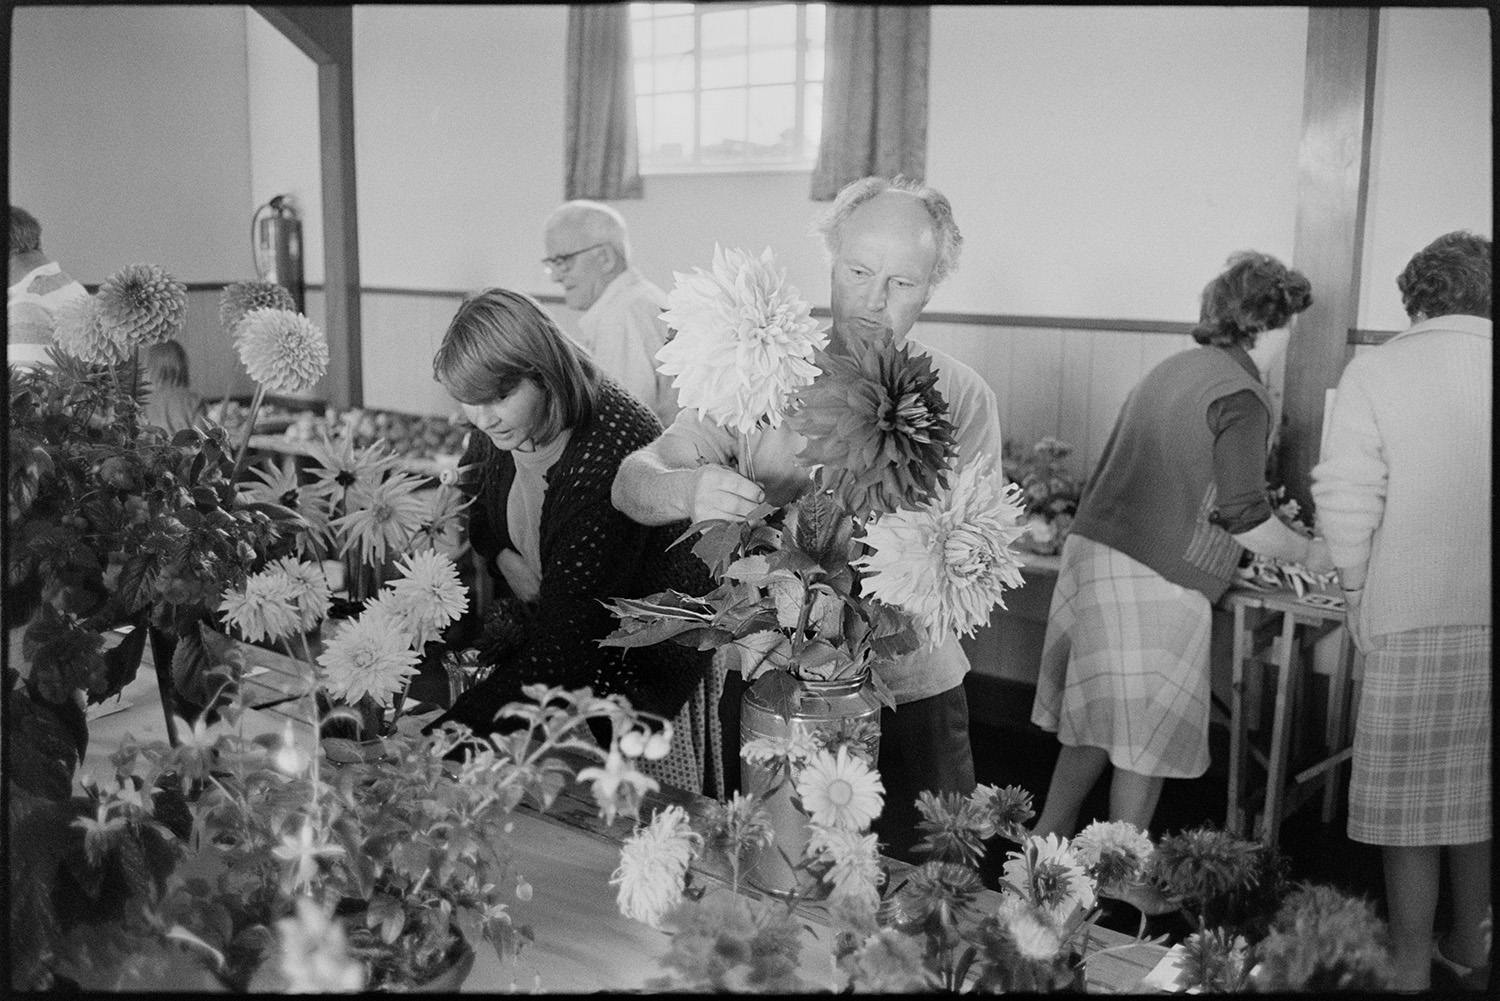 Vegetables, produce and cakes at flower show in village hall, French beans, onions, flowers.
[Michael Mitchell arranging a display of dahlias on a table at Dolton Flower Show, in Dolton Village Hall. Women are looking at other exhibits in the Flower Show.]